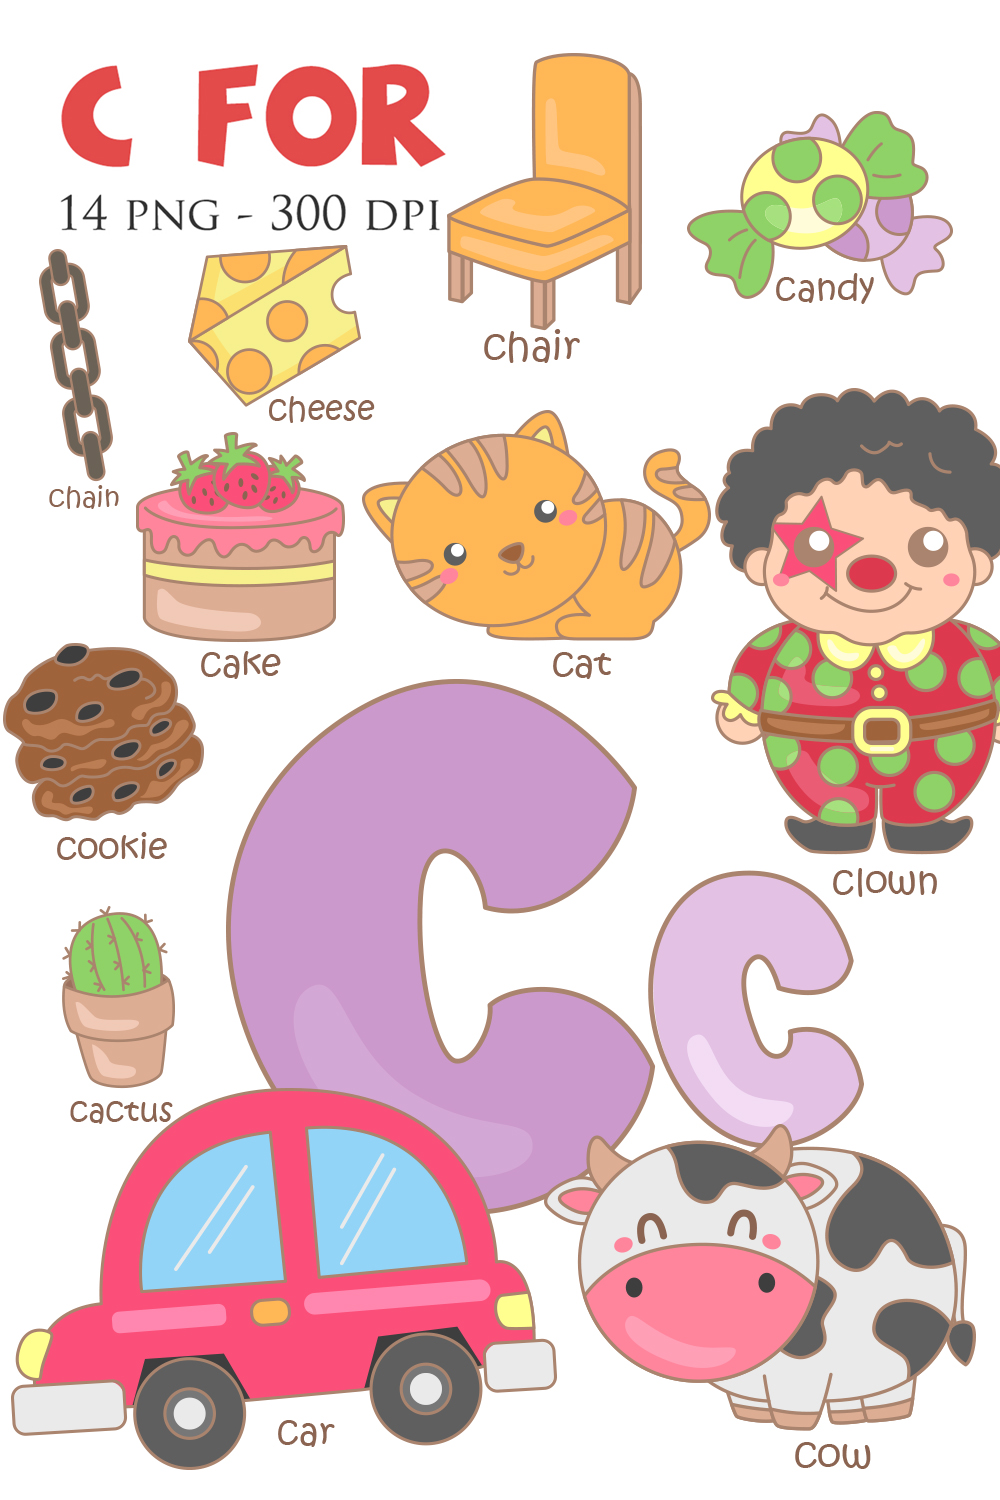 C For Vocabulary School Letter Reading Writing Font Study Learning Student Toodler Kids Car Crab Cake Clown Cookie Cow Cactus Cheese Candy Chain Chair Cat Cartoon Illustration Vector Clipart pinterest preview image.